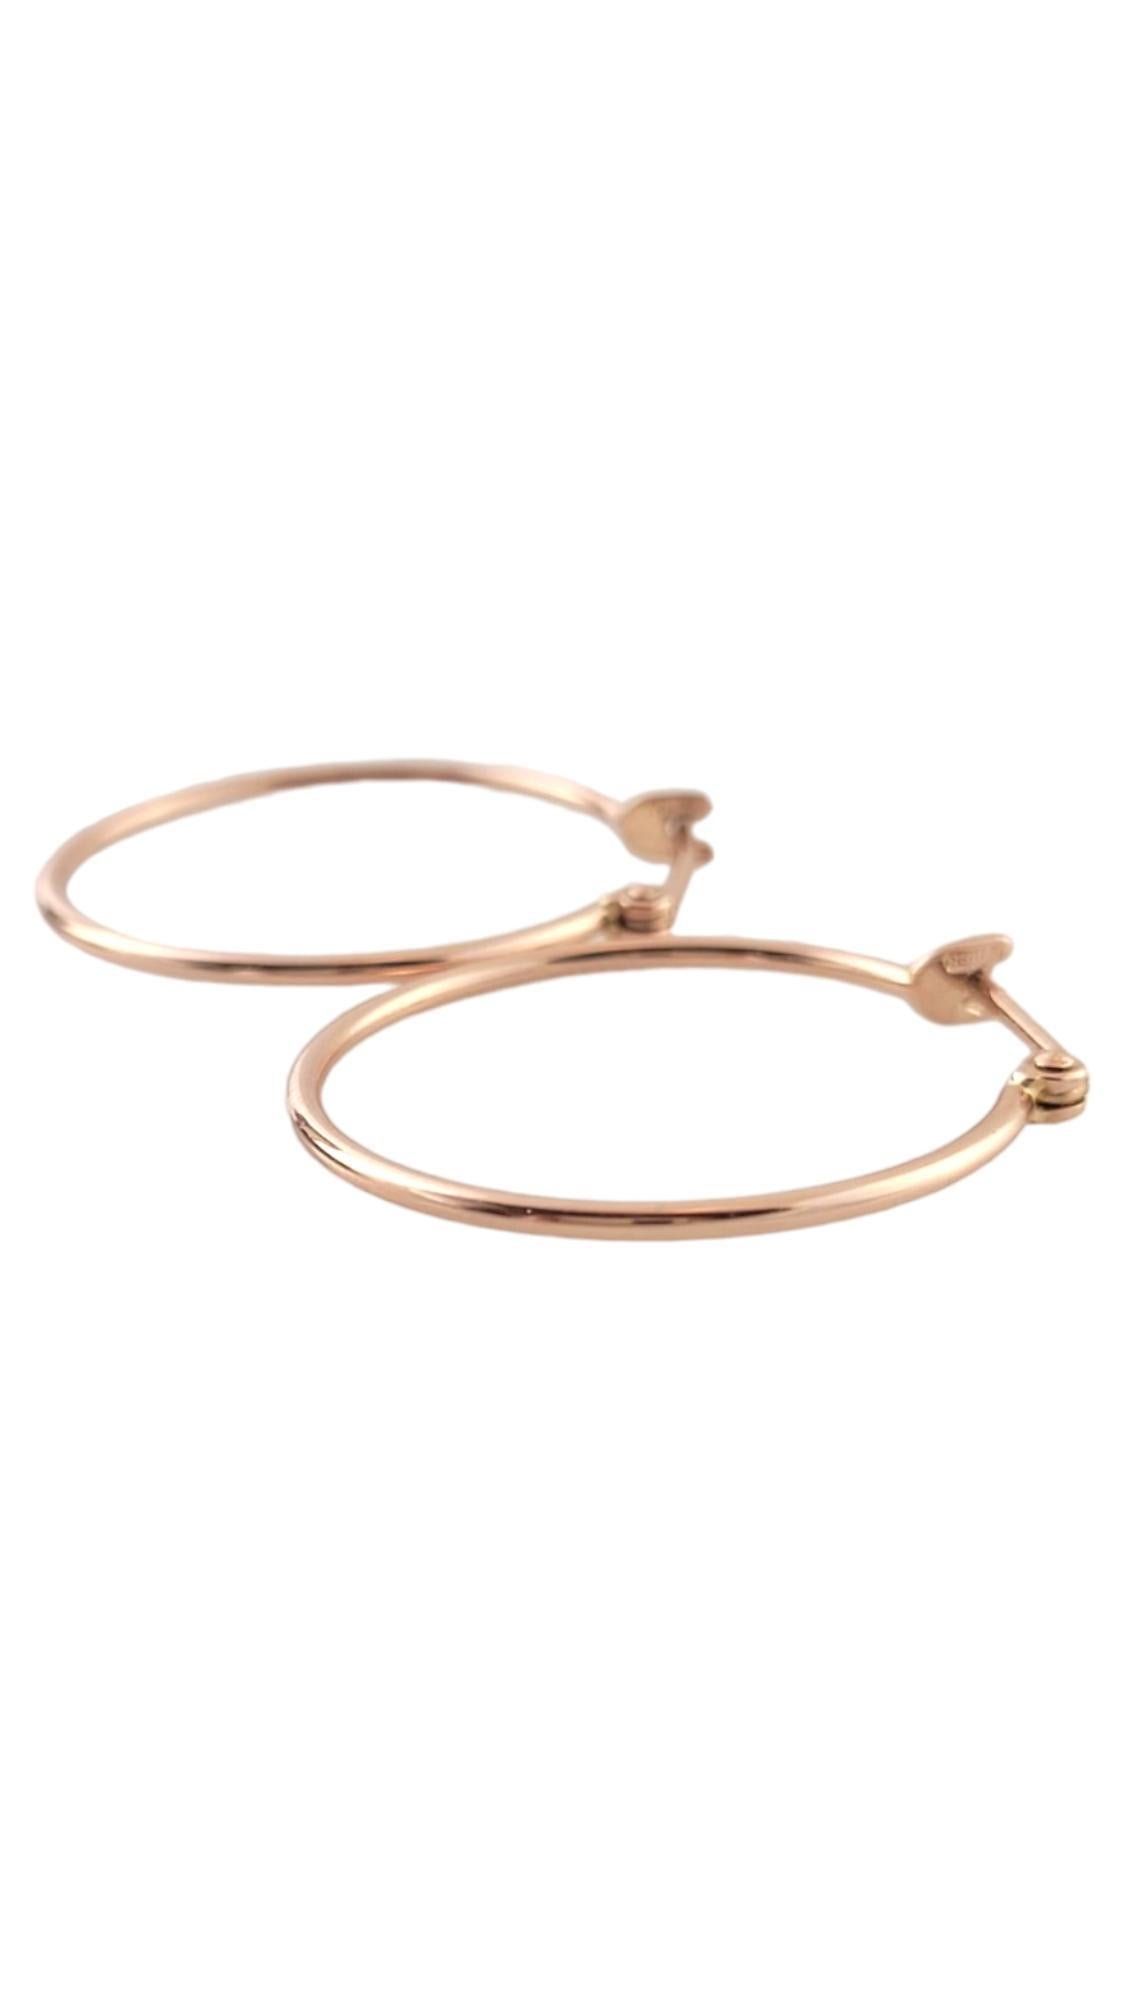 9K Rose Gold Hoop Earrings

This classic set of beautiful hoops were crafted from 9K rose gold!

Diameter: 26.2mm
Width: 1.4mm

Weight: 1.5 dwt/ 2.3 g

Hallmark: 375 star 2053 mi

Very good condition, professionally polished.

Will come packaged in